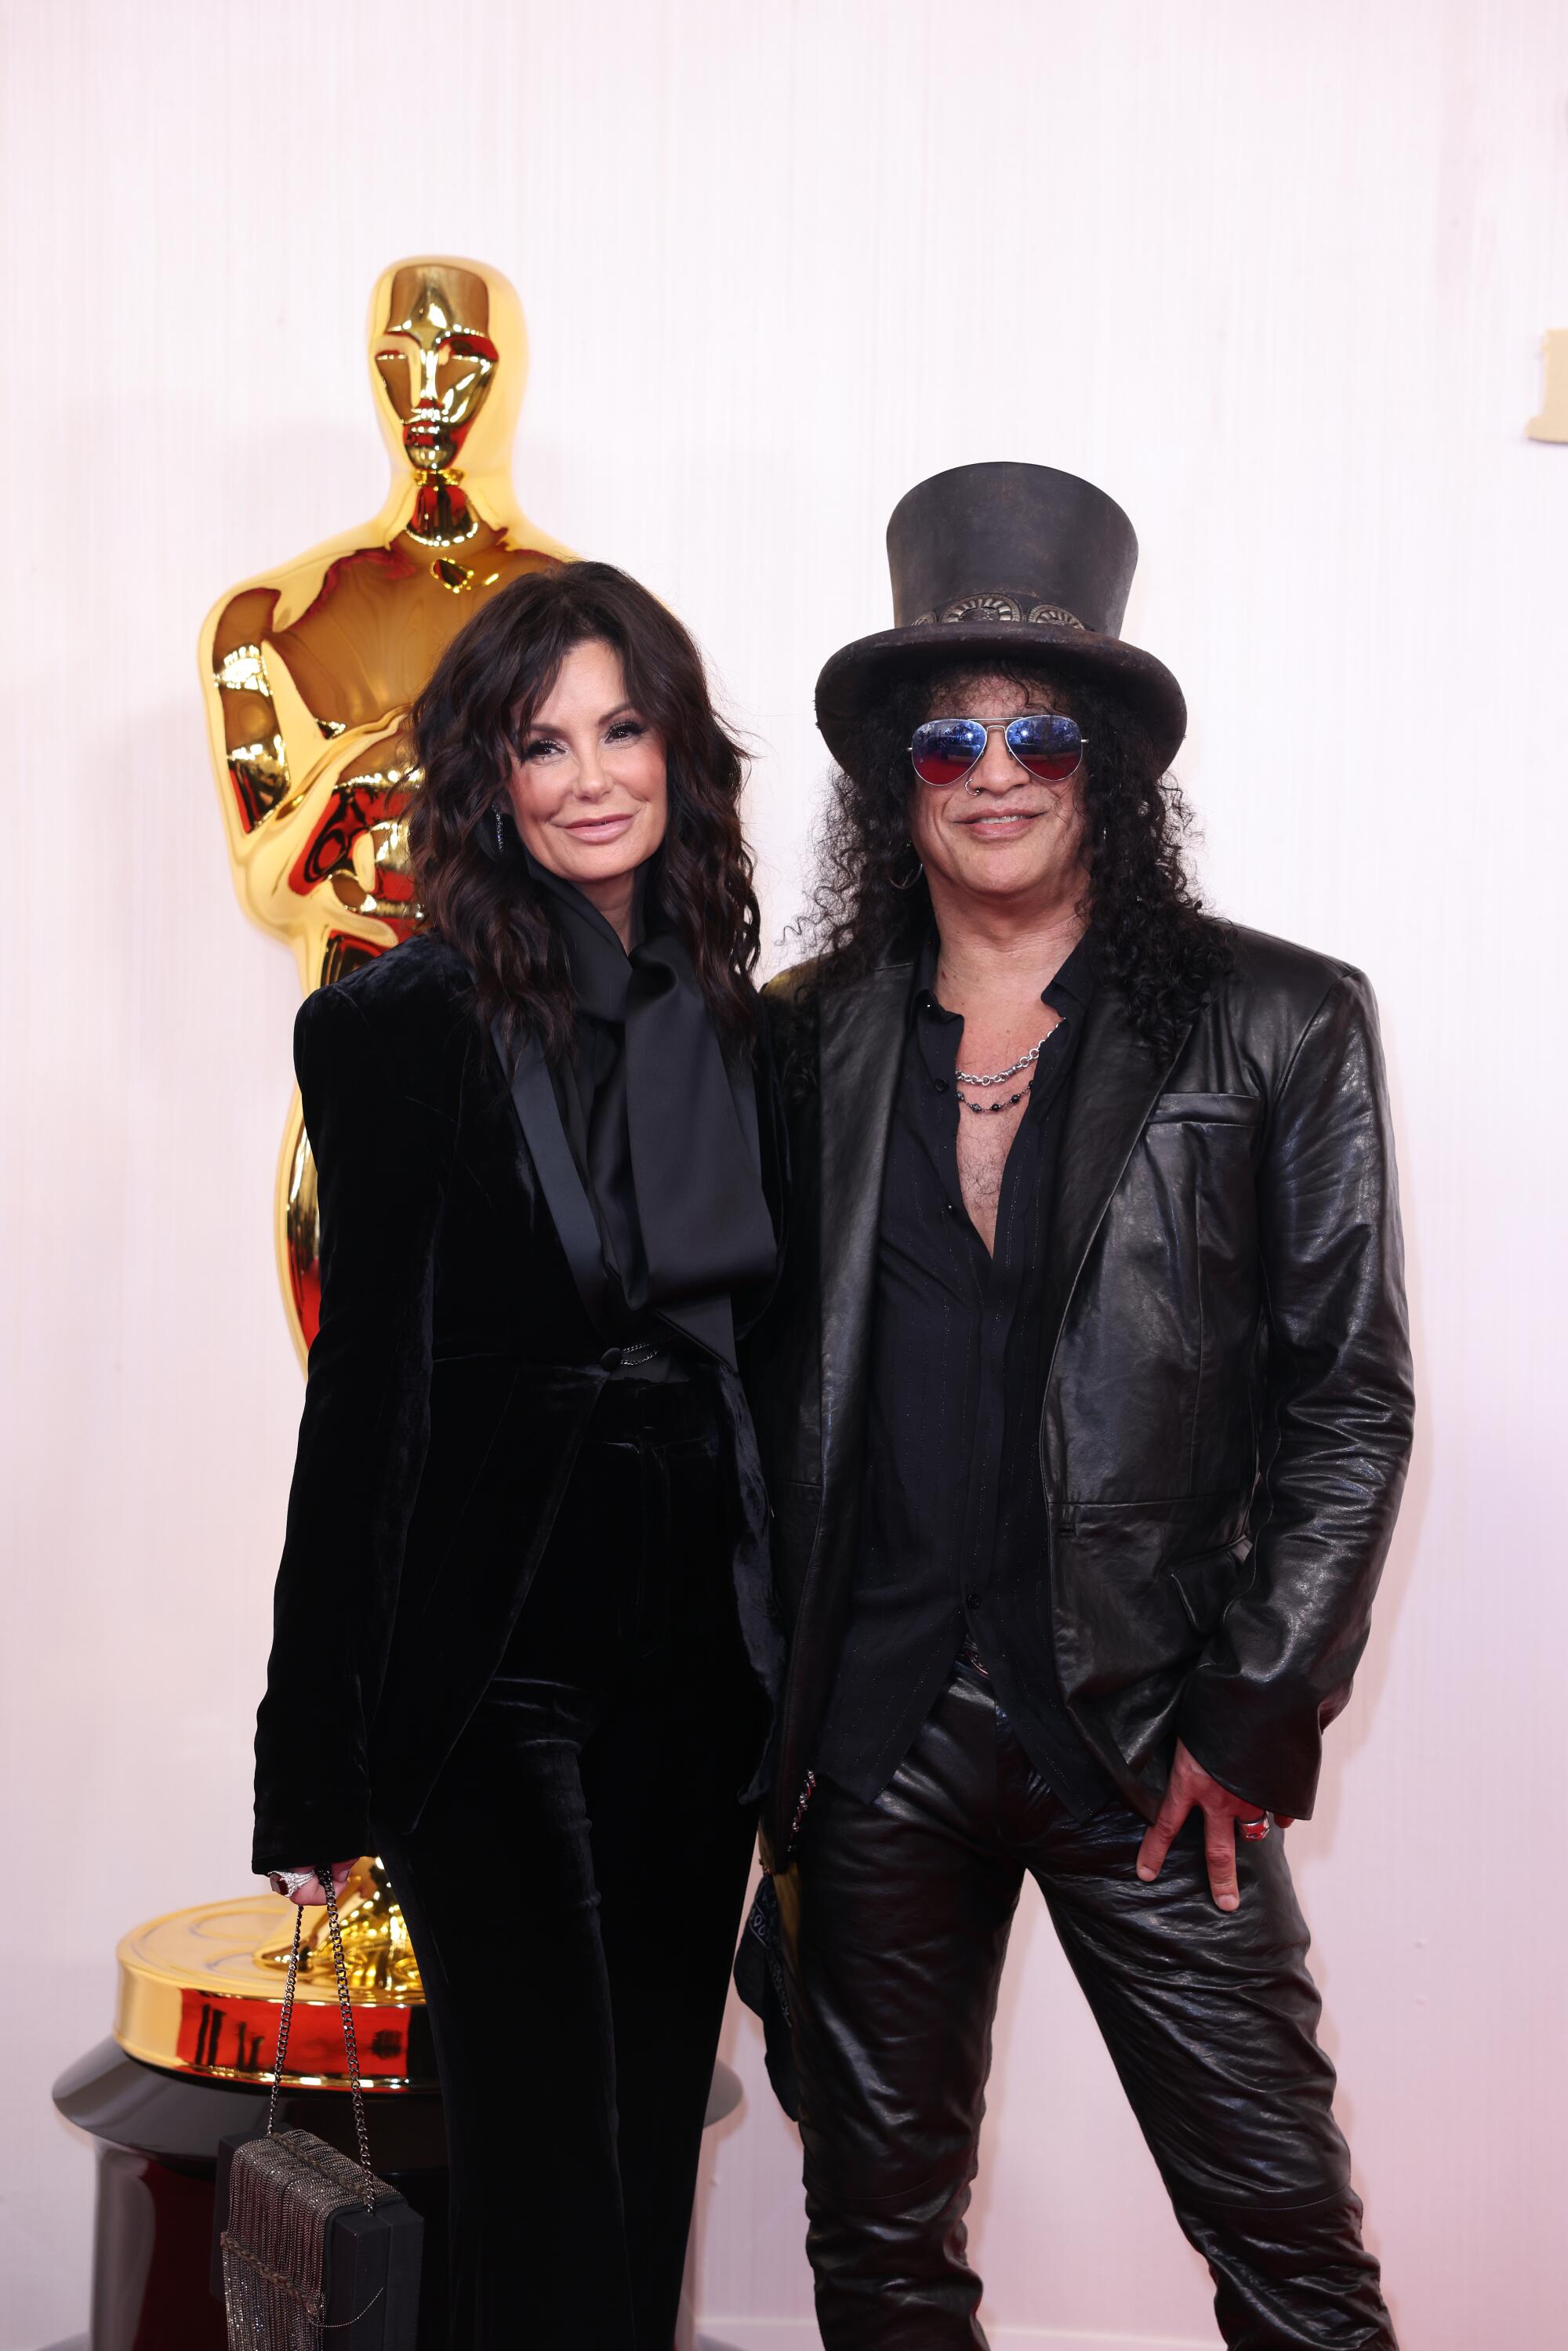 Meegan Hodges and Slash, both in black, pose in front of an Oscar statue. 